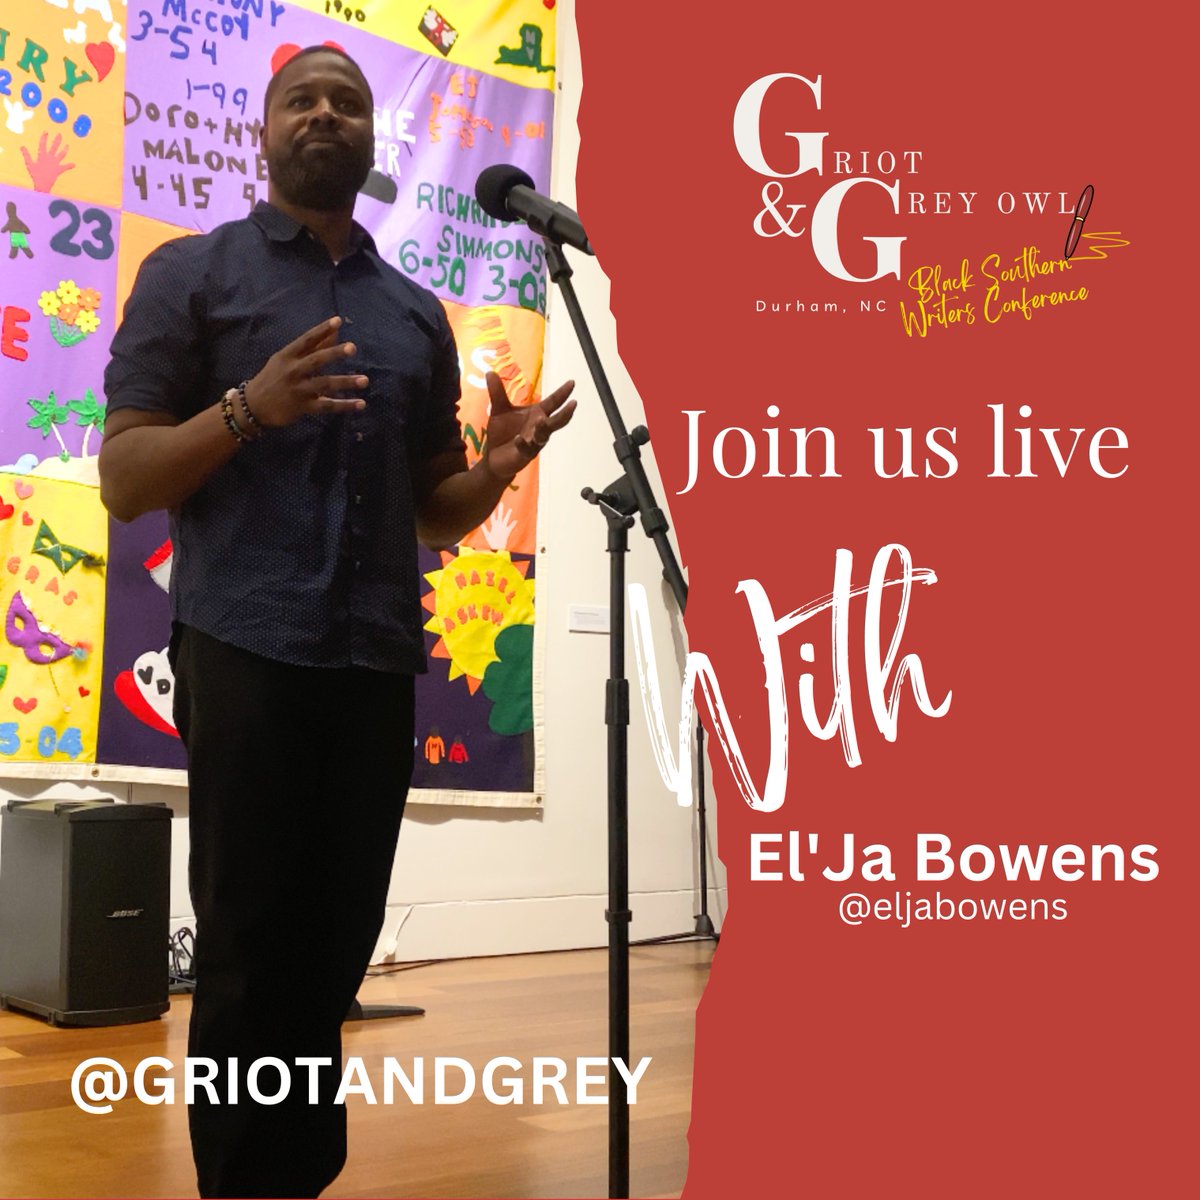 Join us this Wednesday at 6:00pm for a LIVE Instagram chat with El'Ja Bowens.  💫🗣️
#poetrycommunity #livechat #creativityunleashed #inspiration #wordsmith #poetsofinstagram #literarygems #unveilingtalent #griotandgreyowl #durhamnc #poetrylife #blackwriters #slampoetry